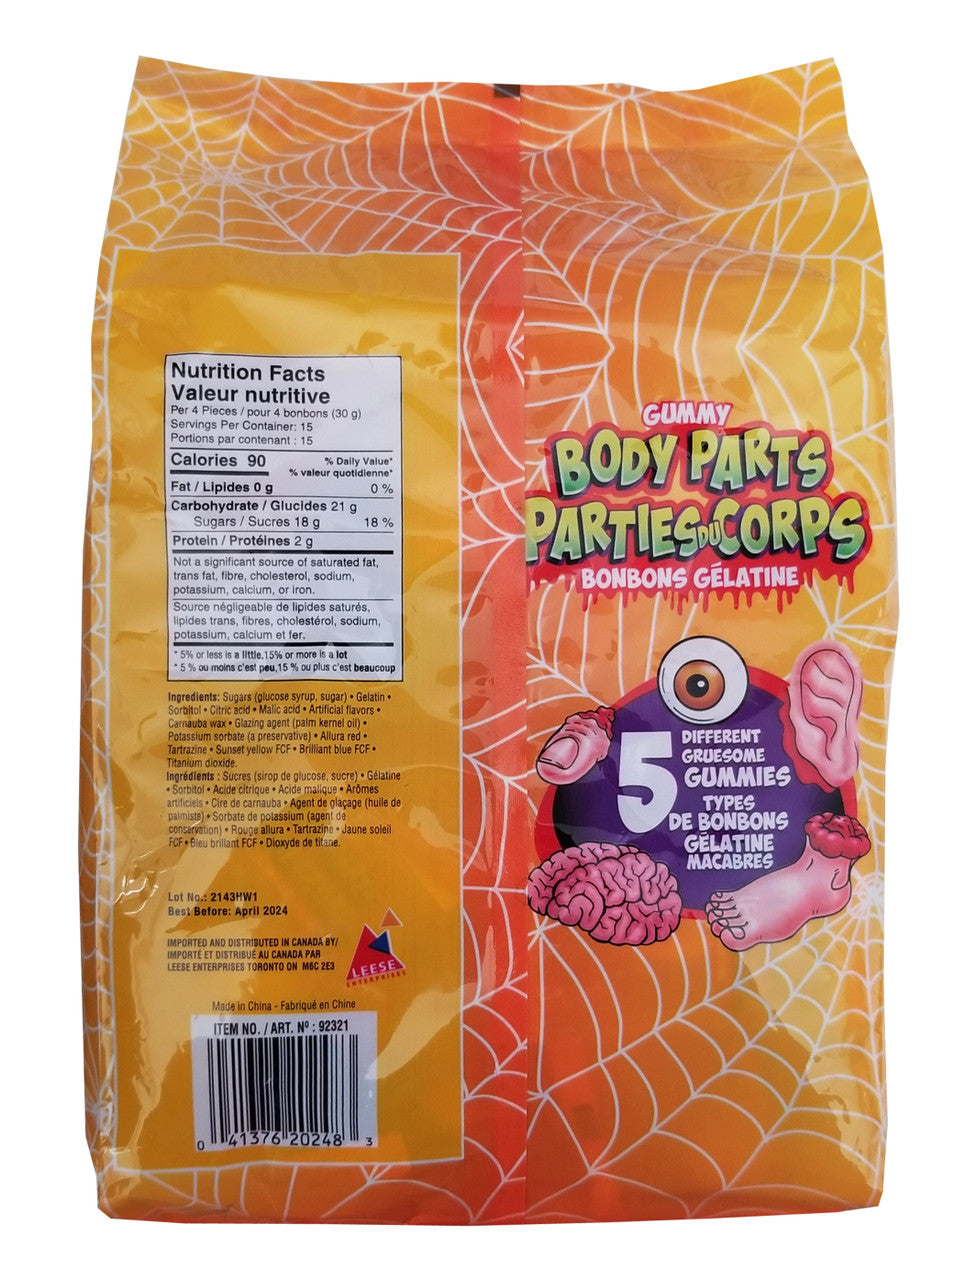 Frankford Gummy Body Parts, 60ct, 450g/1 lb., Bag {Imported from Canada}